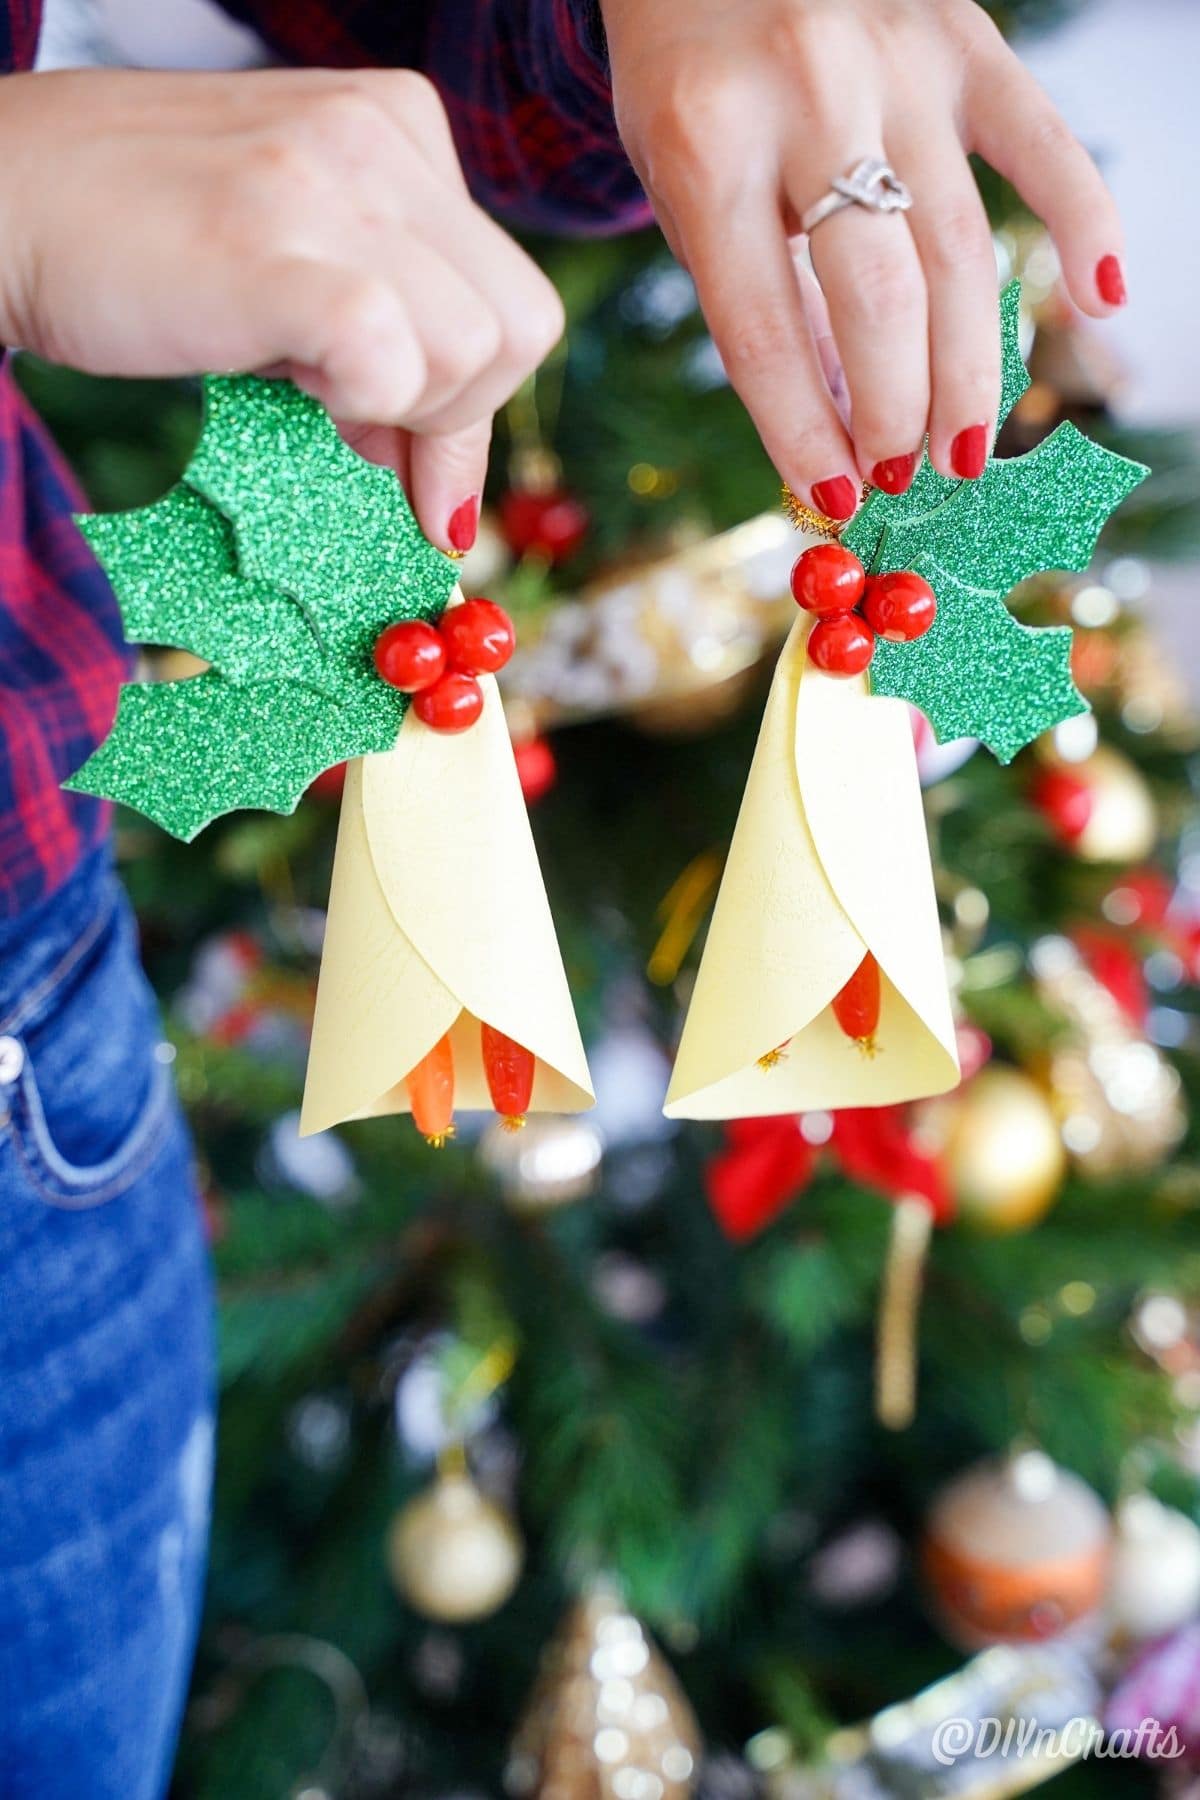 ladies hands holding paper ornaments by Christmas tree